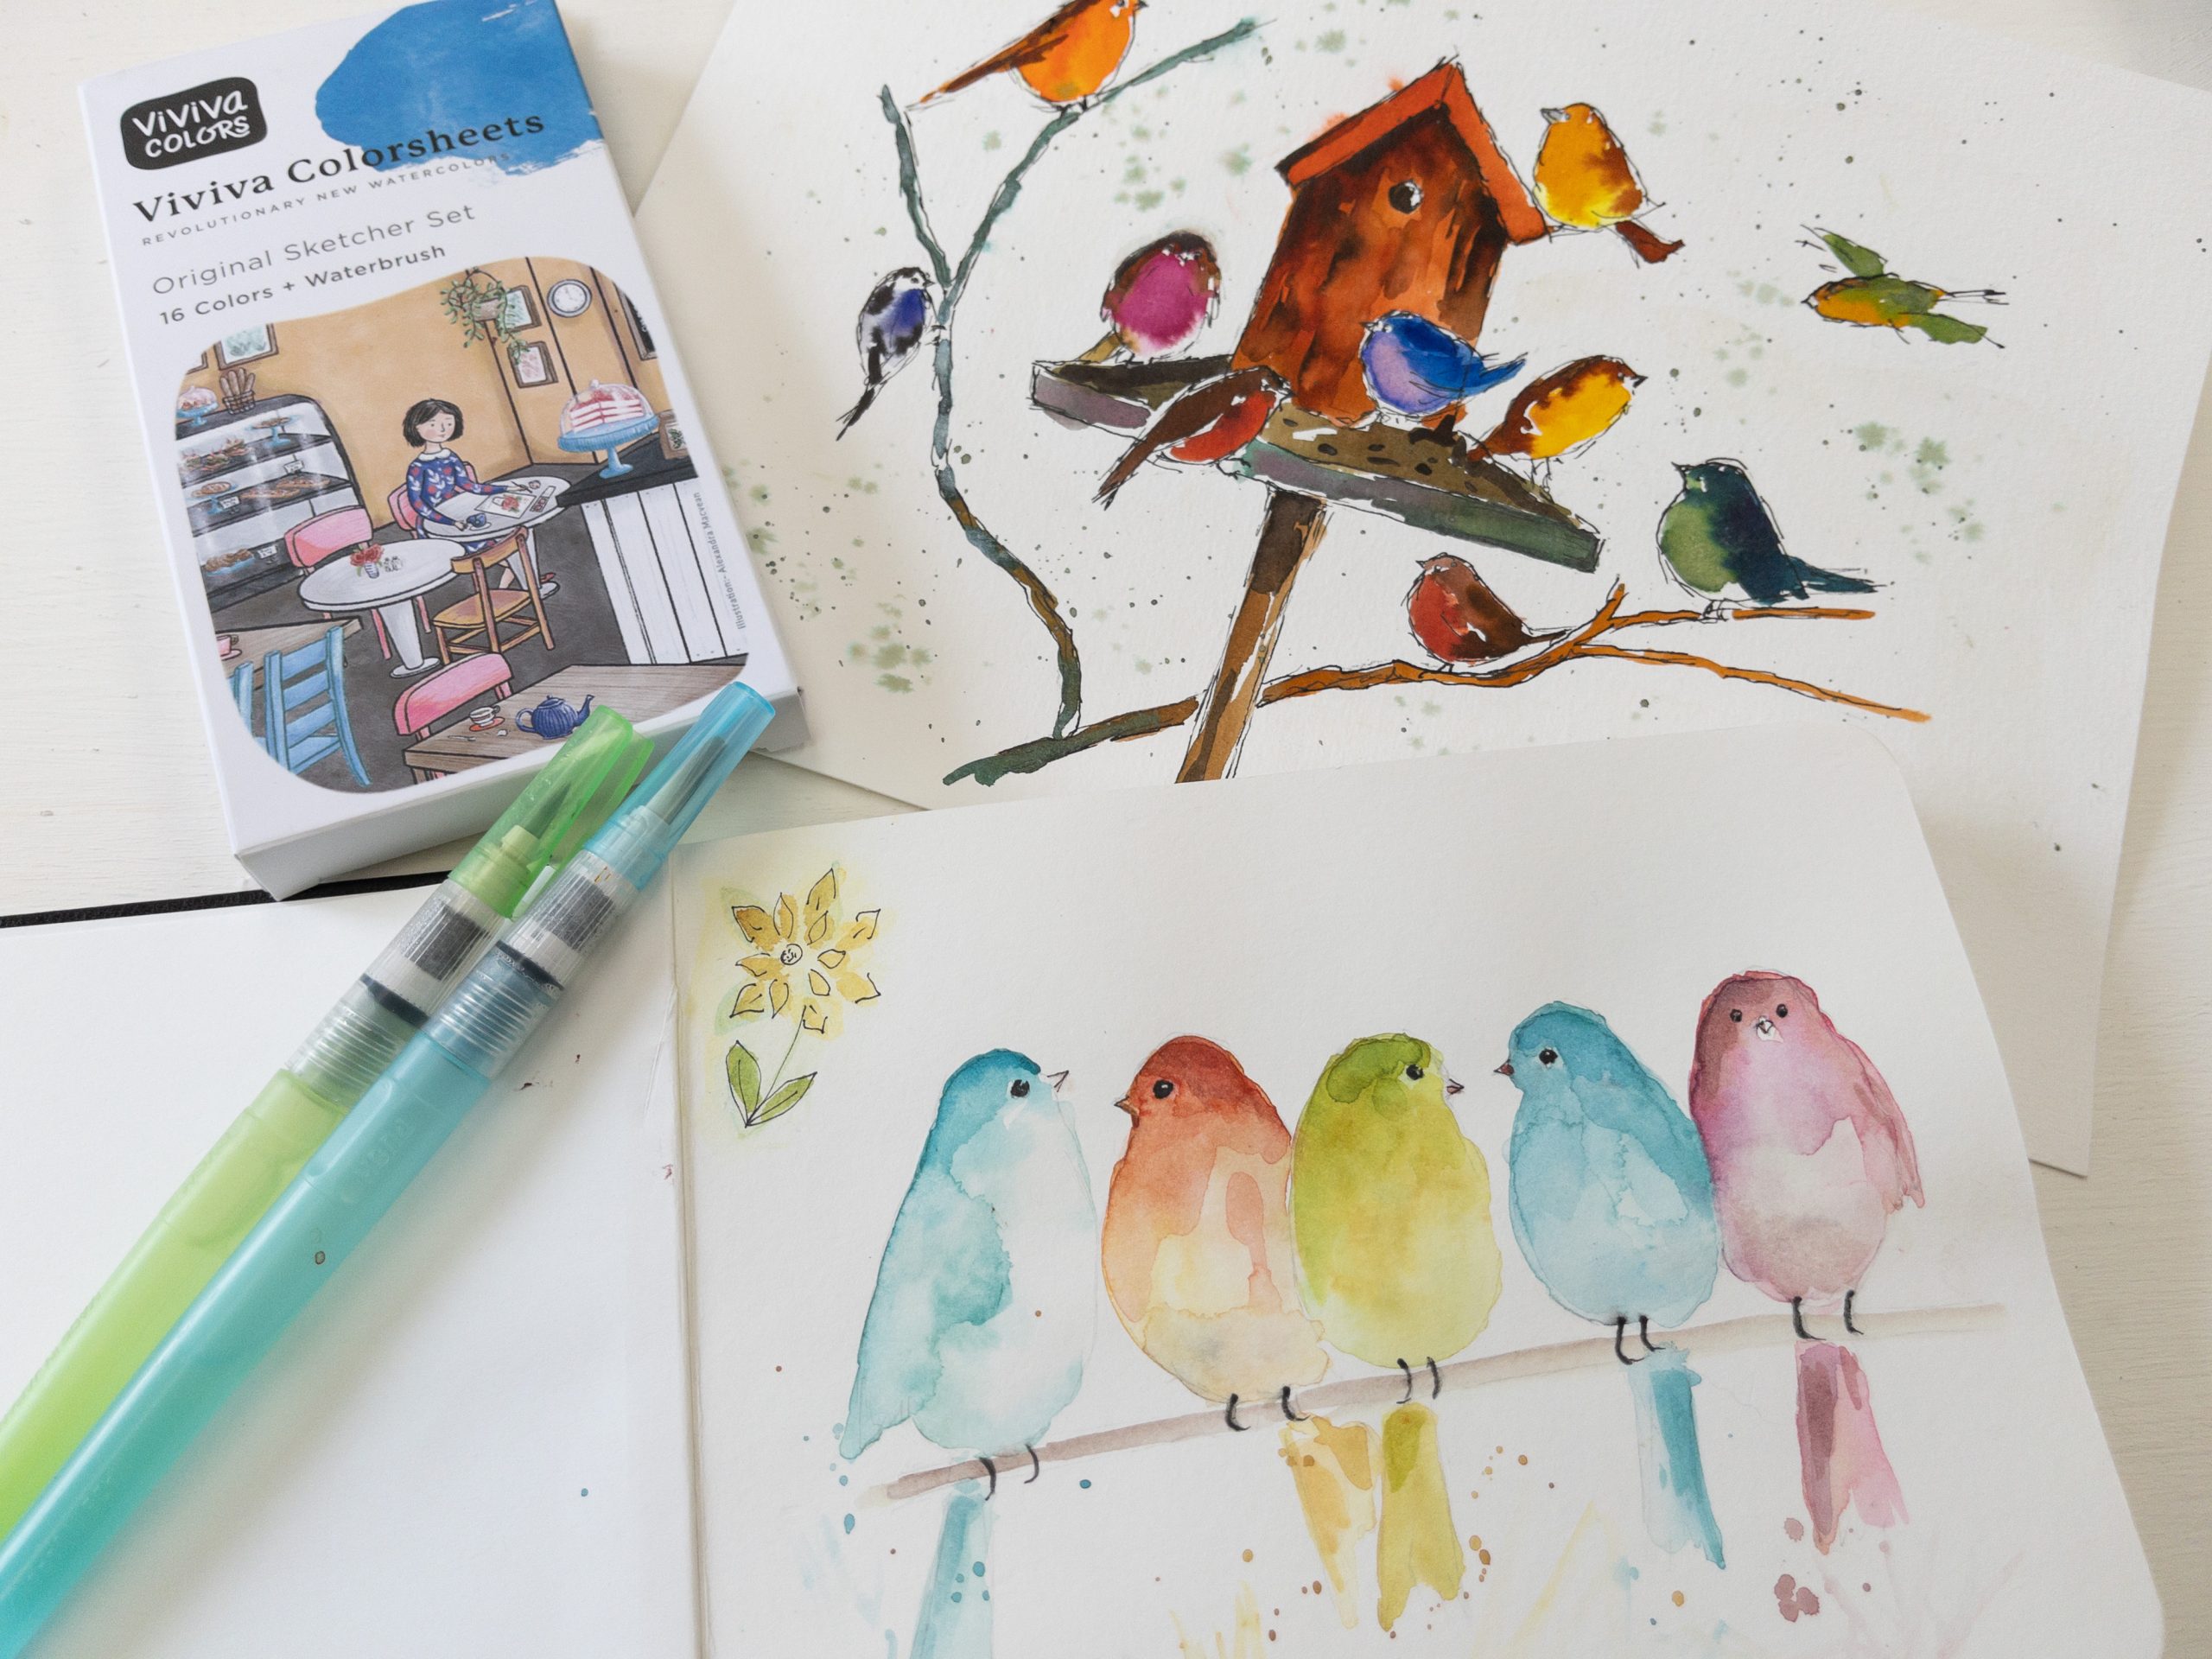 watercolor birds painted with Viviva colorsheets and Kuretake waterbrushes